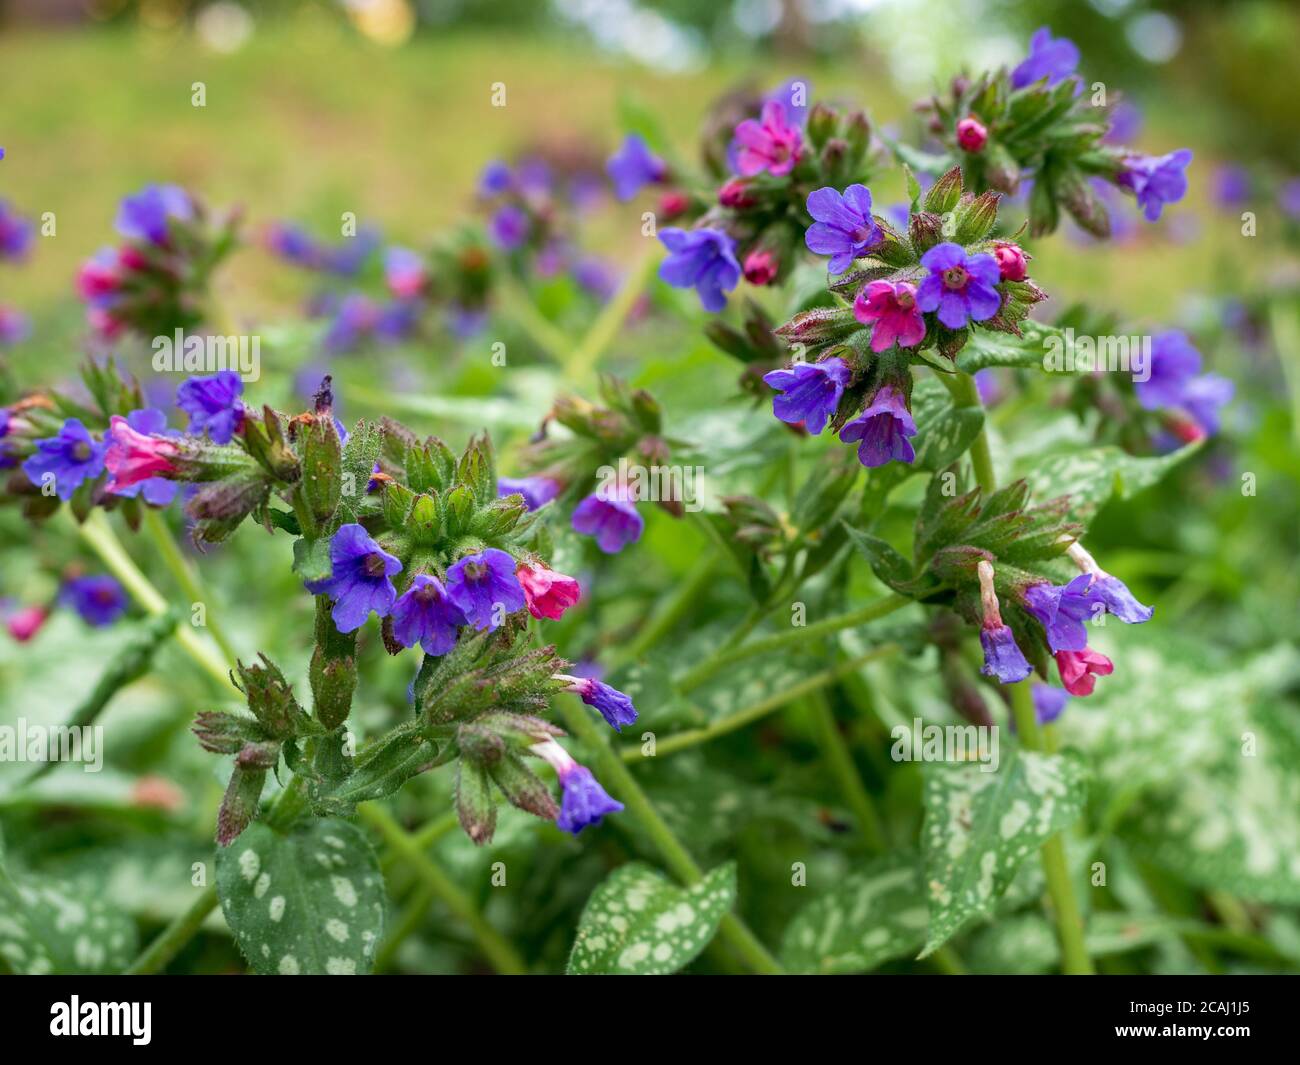 Close-up of blooming common lungwort flowers during spring. Pulmonaria officinalis also known as Mary's tears or Our Lady's milk drops.Blurred backgro Stock Photo